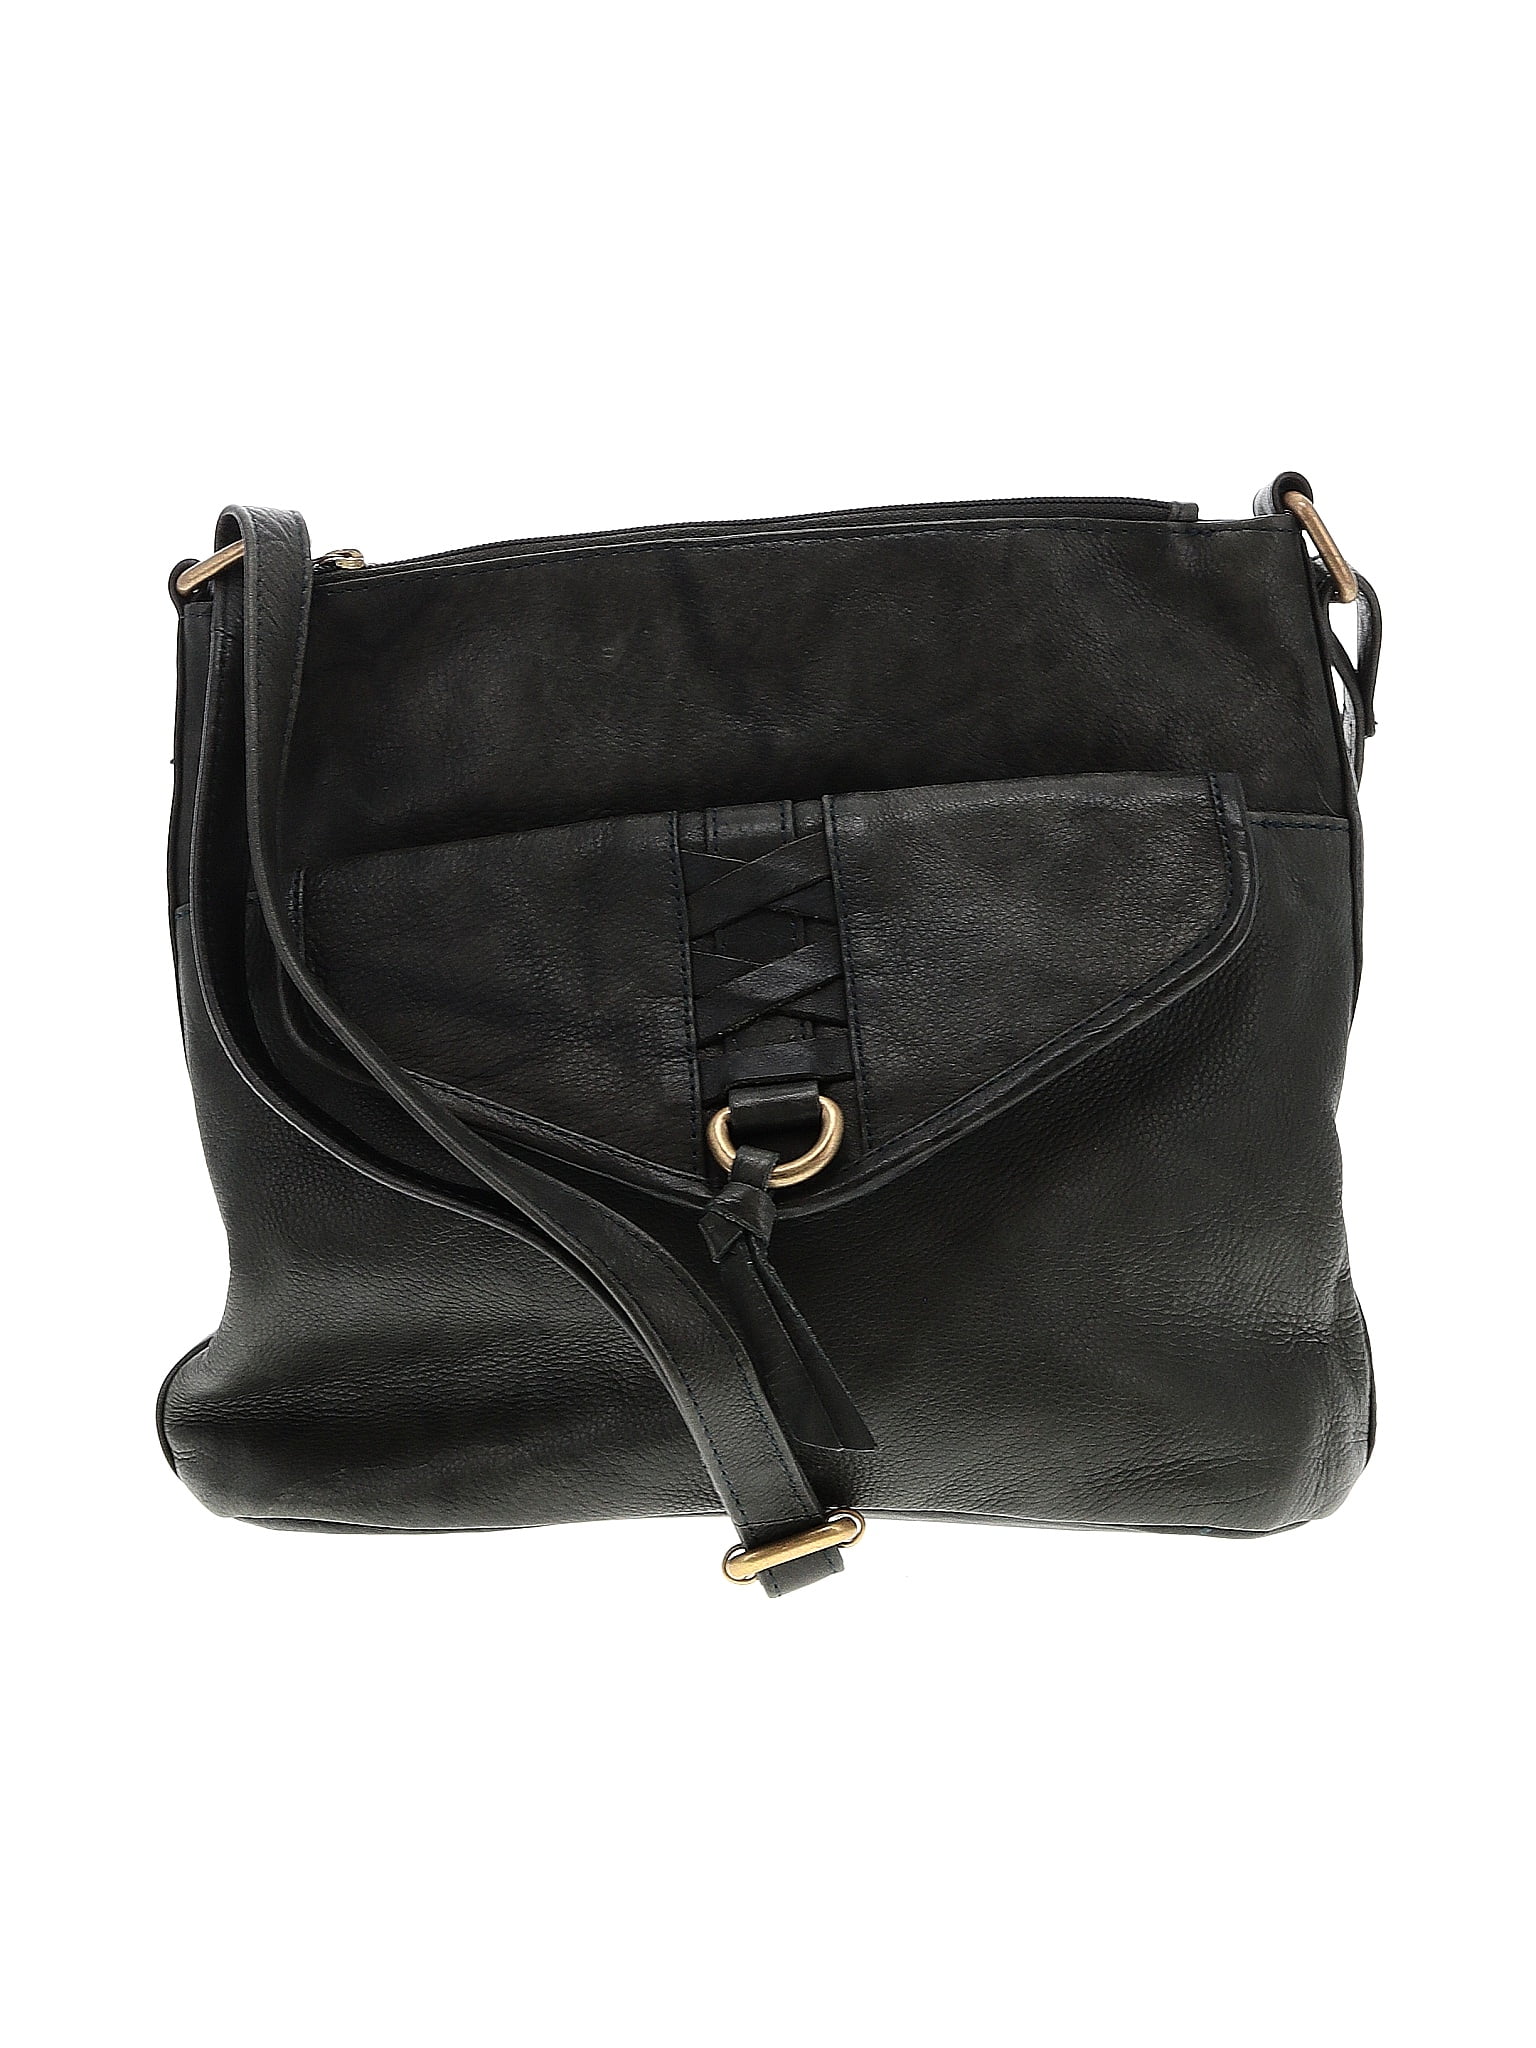 Great American Leatherworks Handbags On Sale Up To 90% Off Retail | thredUP